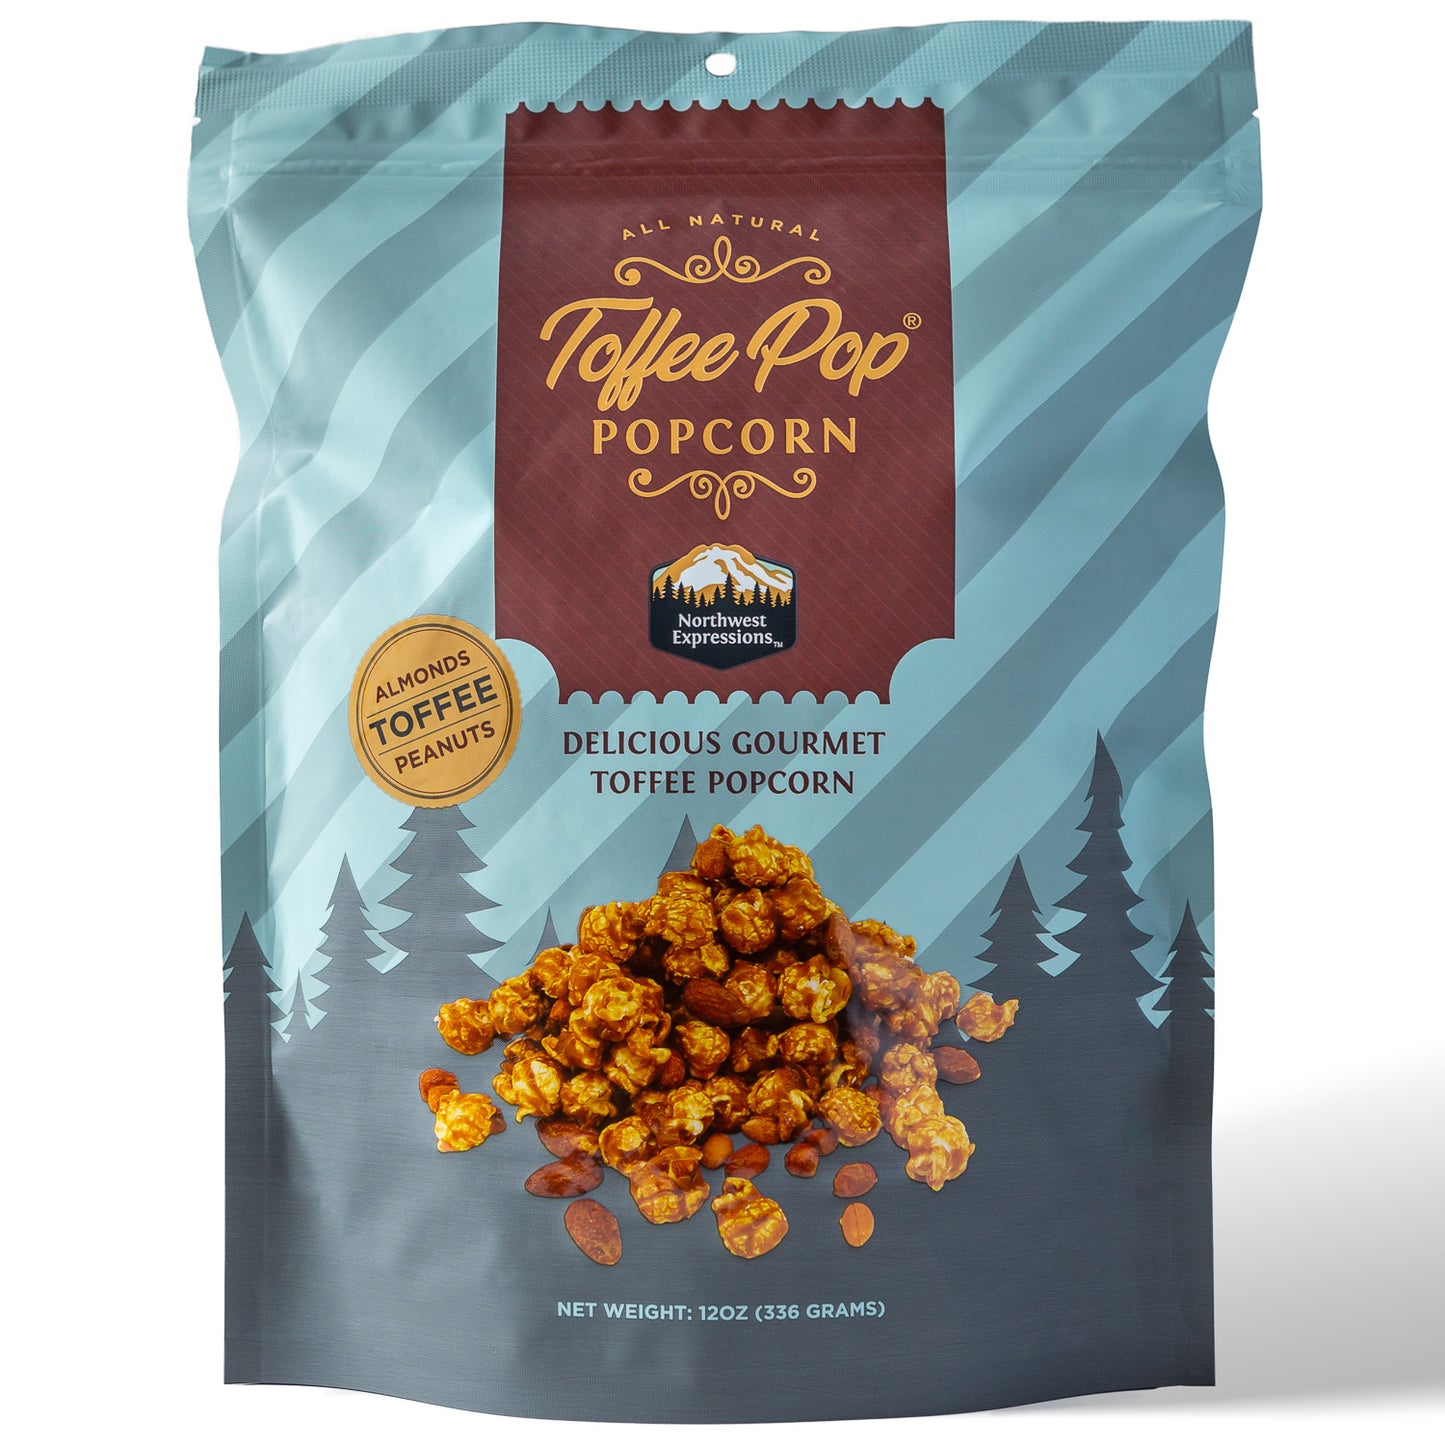 a 12 ounce pouch of northwest expressions toffee pop gourmet popcorn